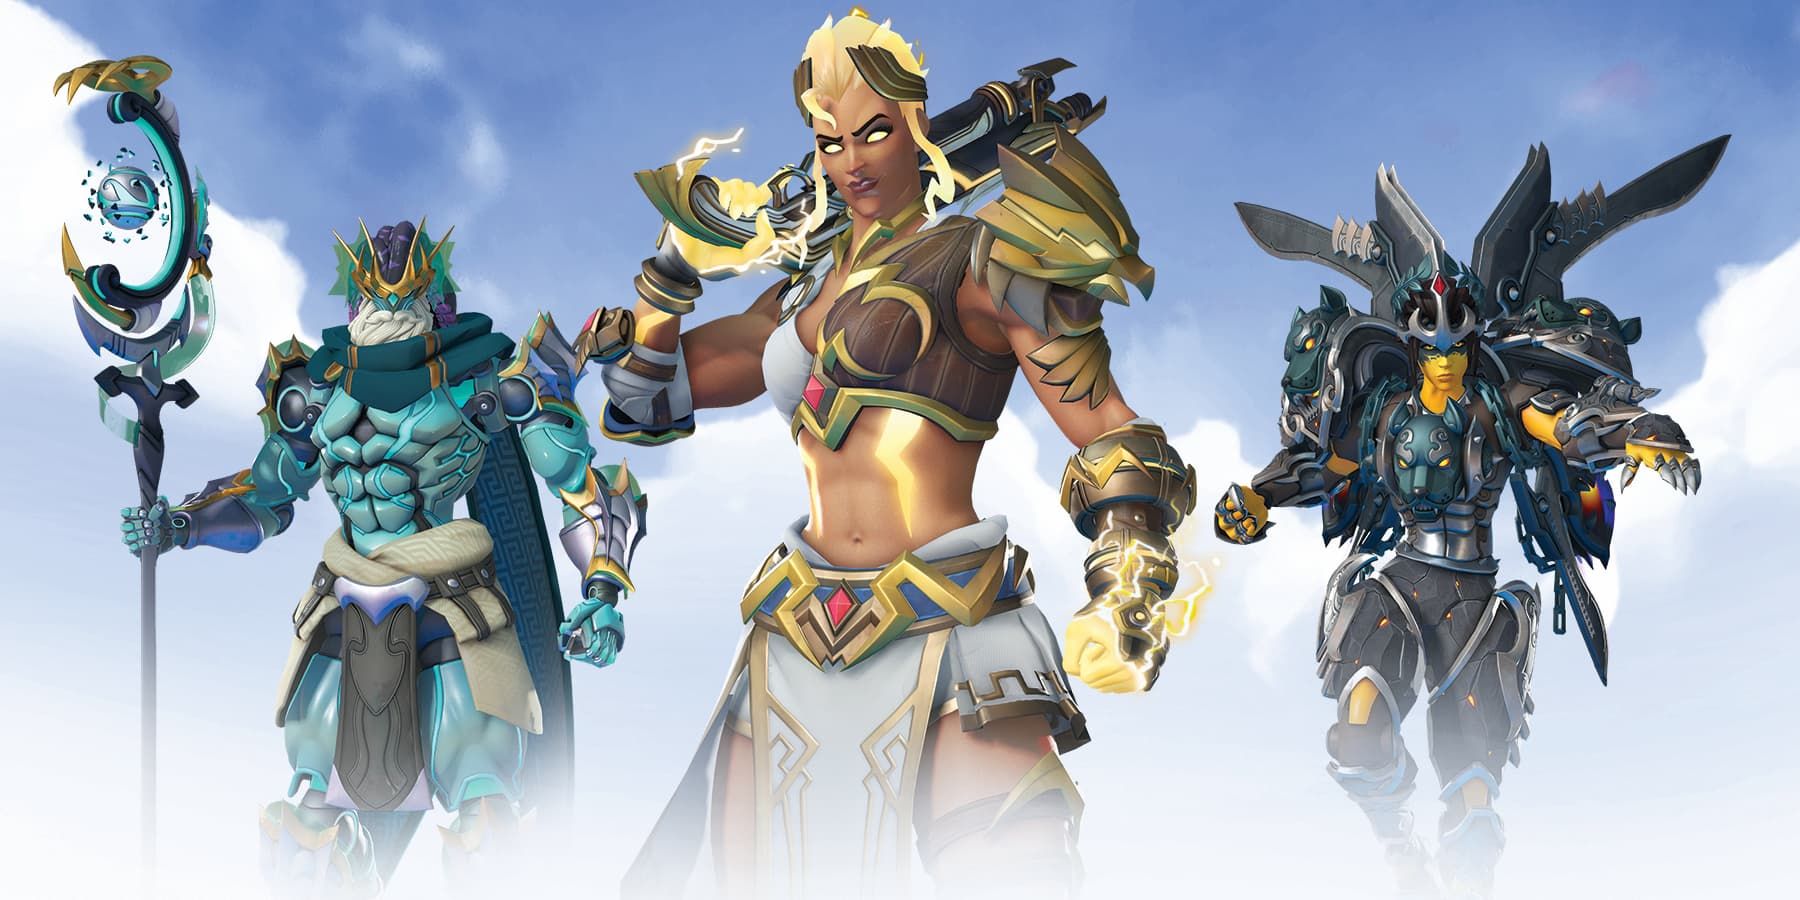 the legendary and mythic skins coming to overwatch 2 season 2